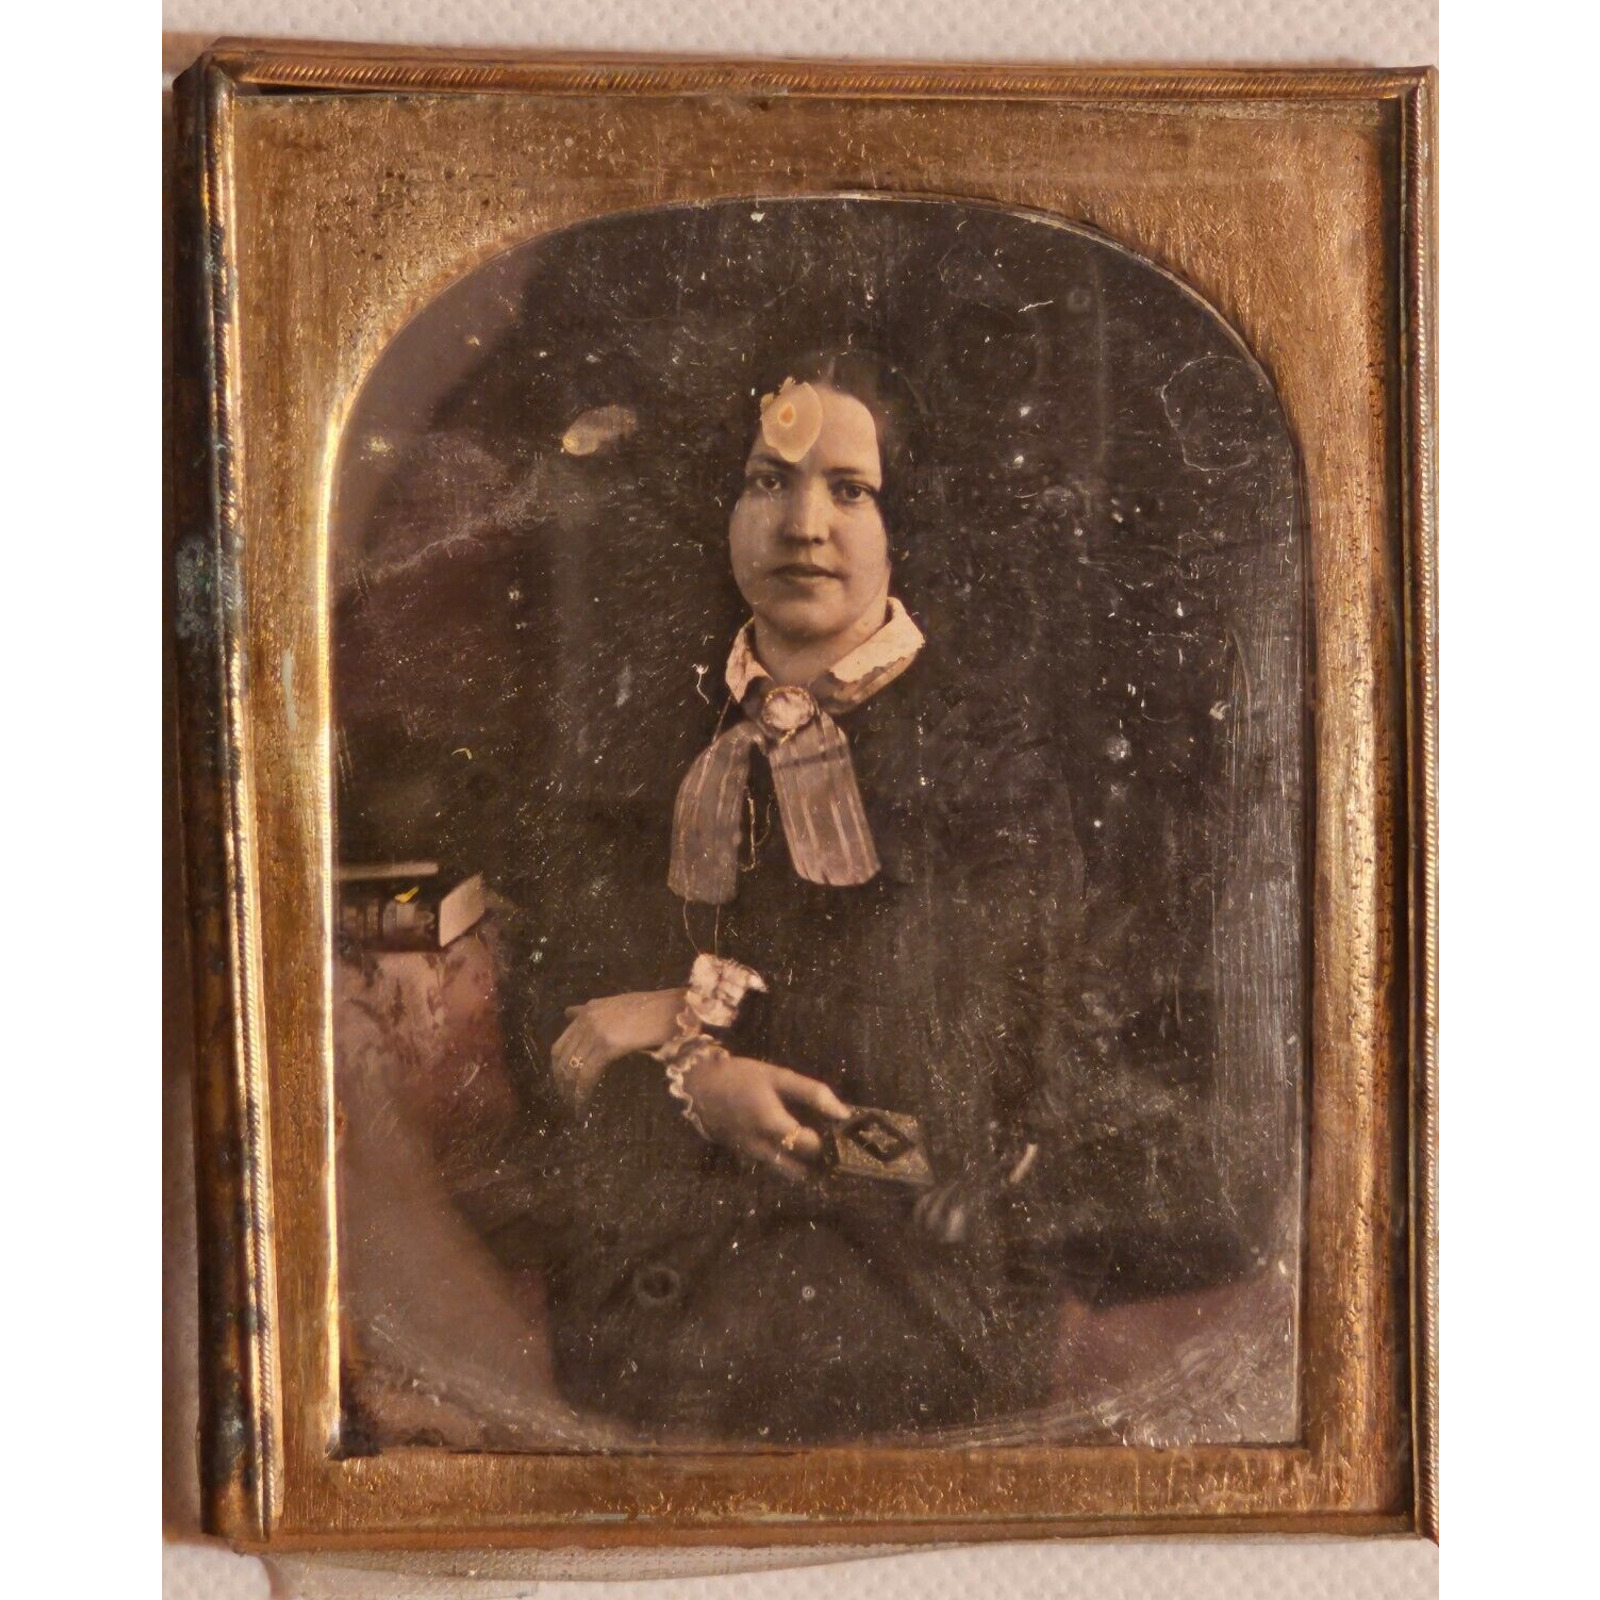 1/4th Plate Daguerreotype Of A Young Woman With Some Coloring Of Jewelry